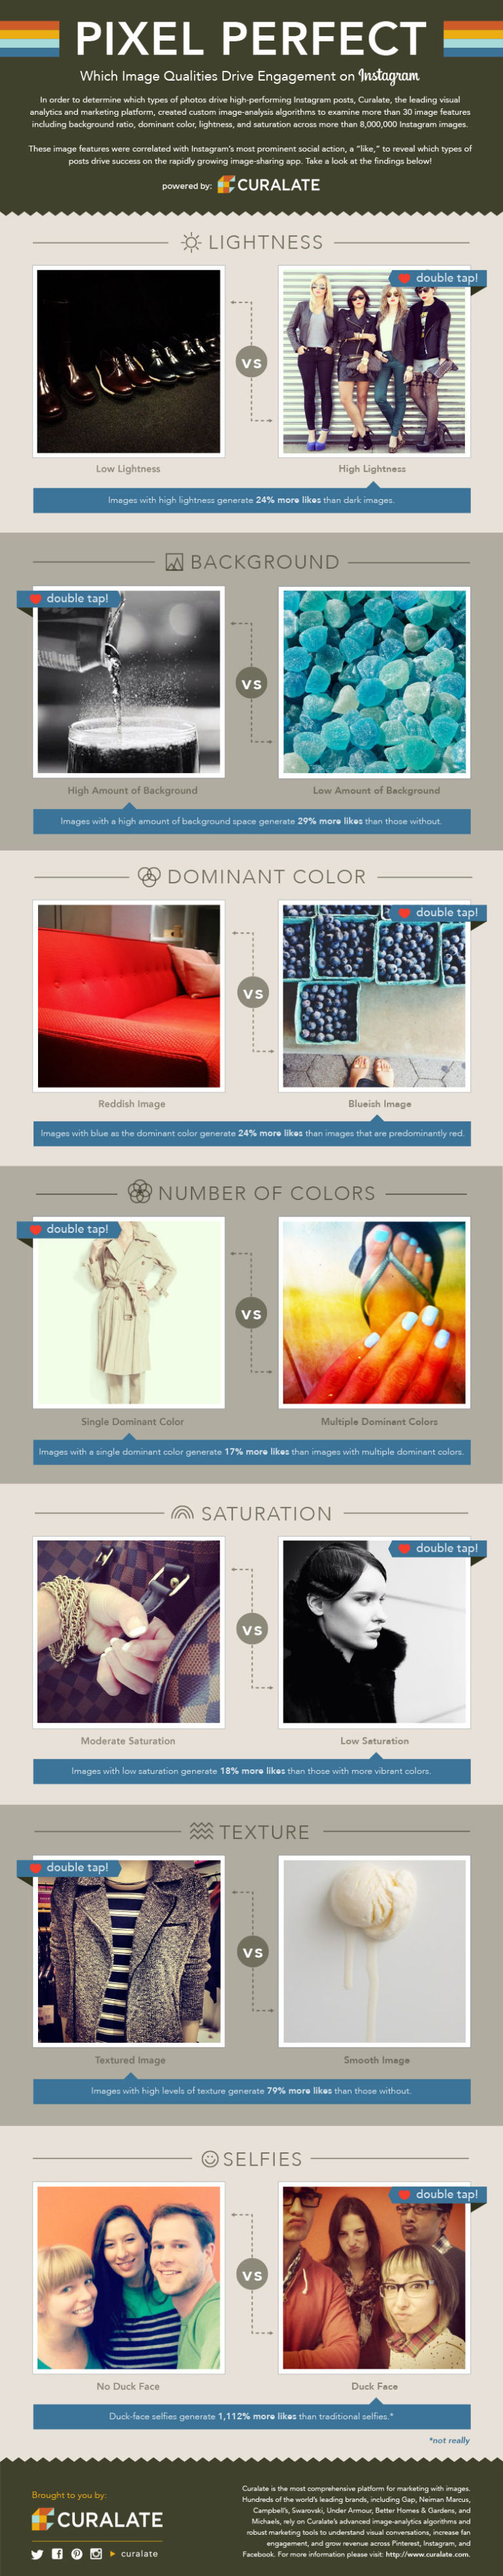 7 Tips To Instagram Photos That Will Get You More Likes (Infographic) Infographic Credit: http://blog.curalate.com/image-qualities-that-drive-likes-on-instagram/